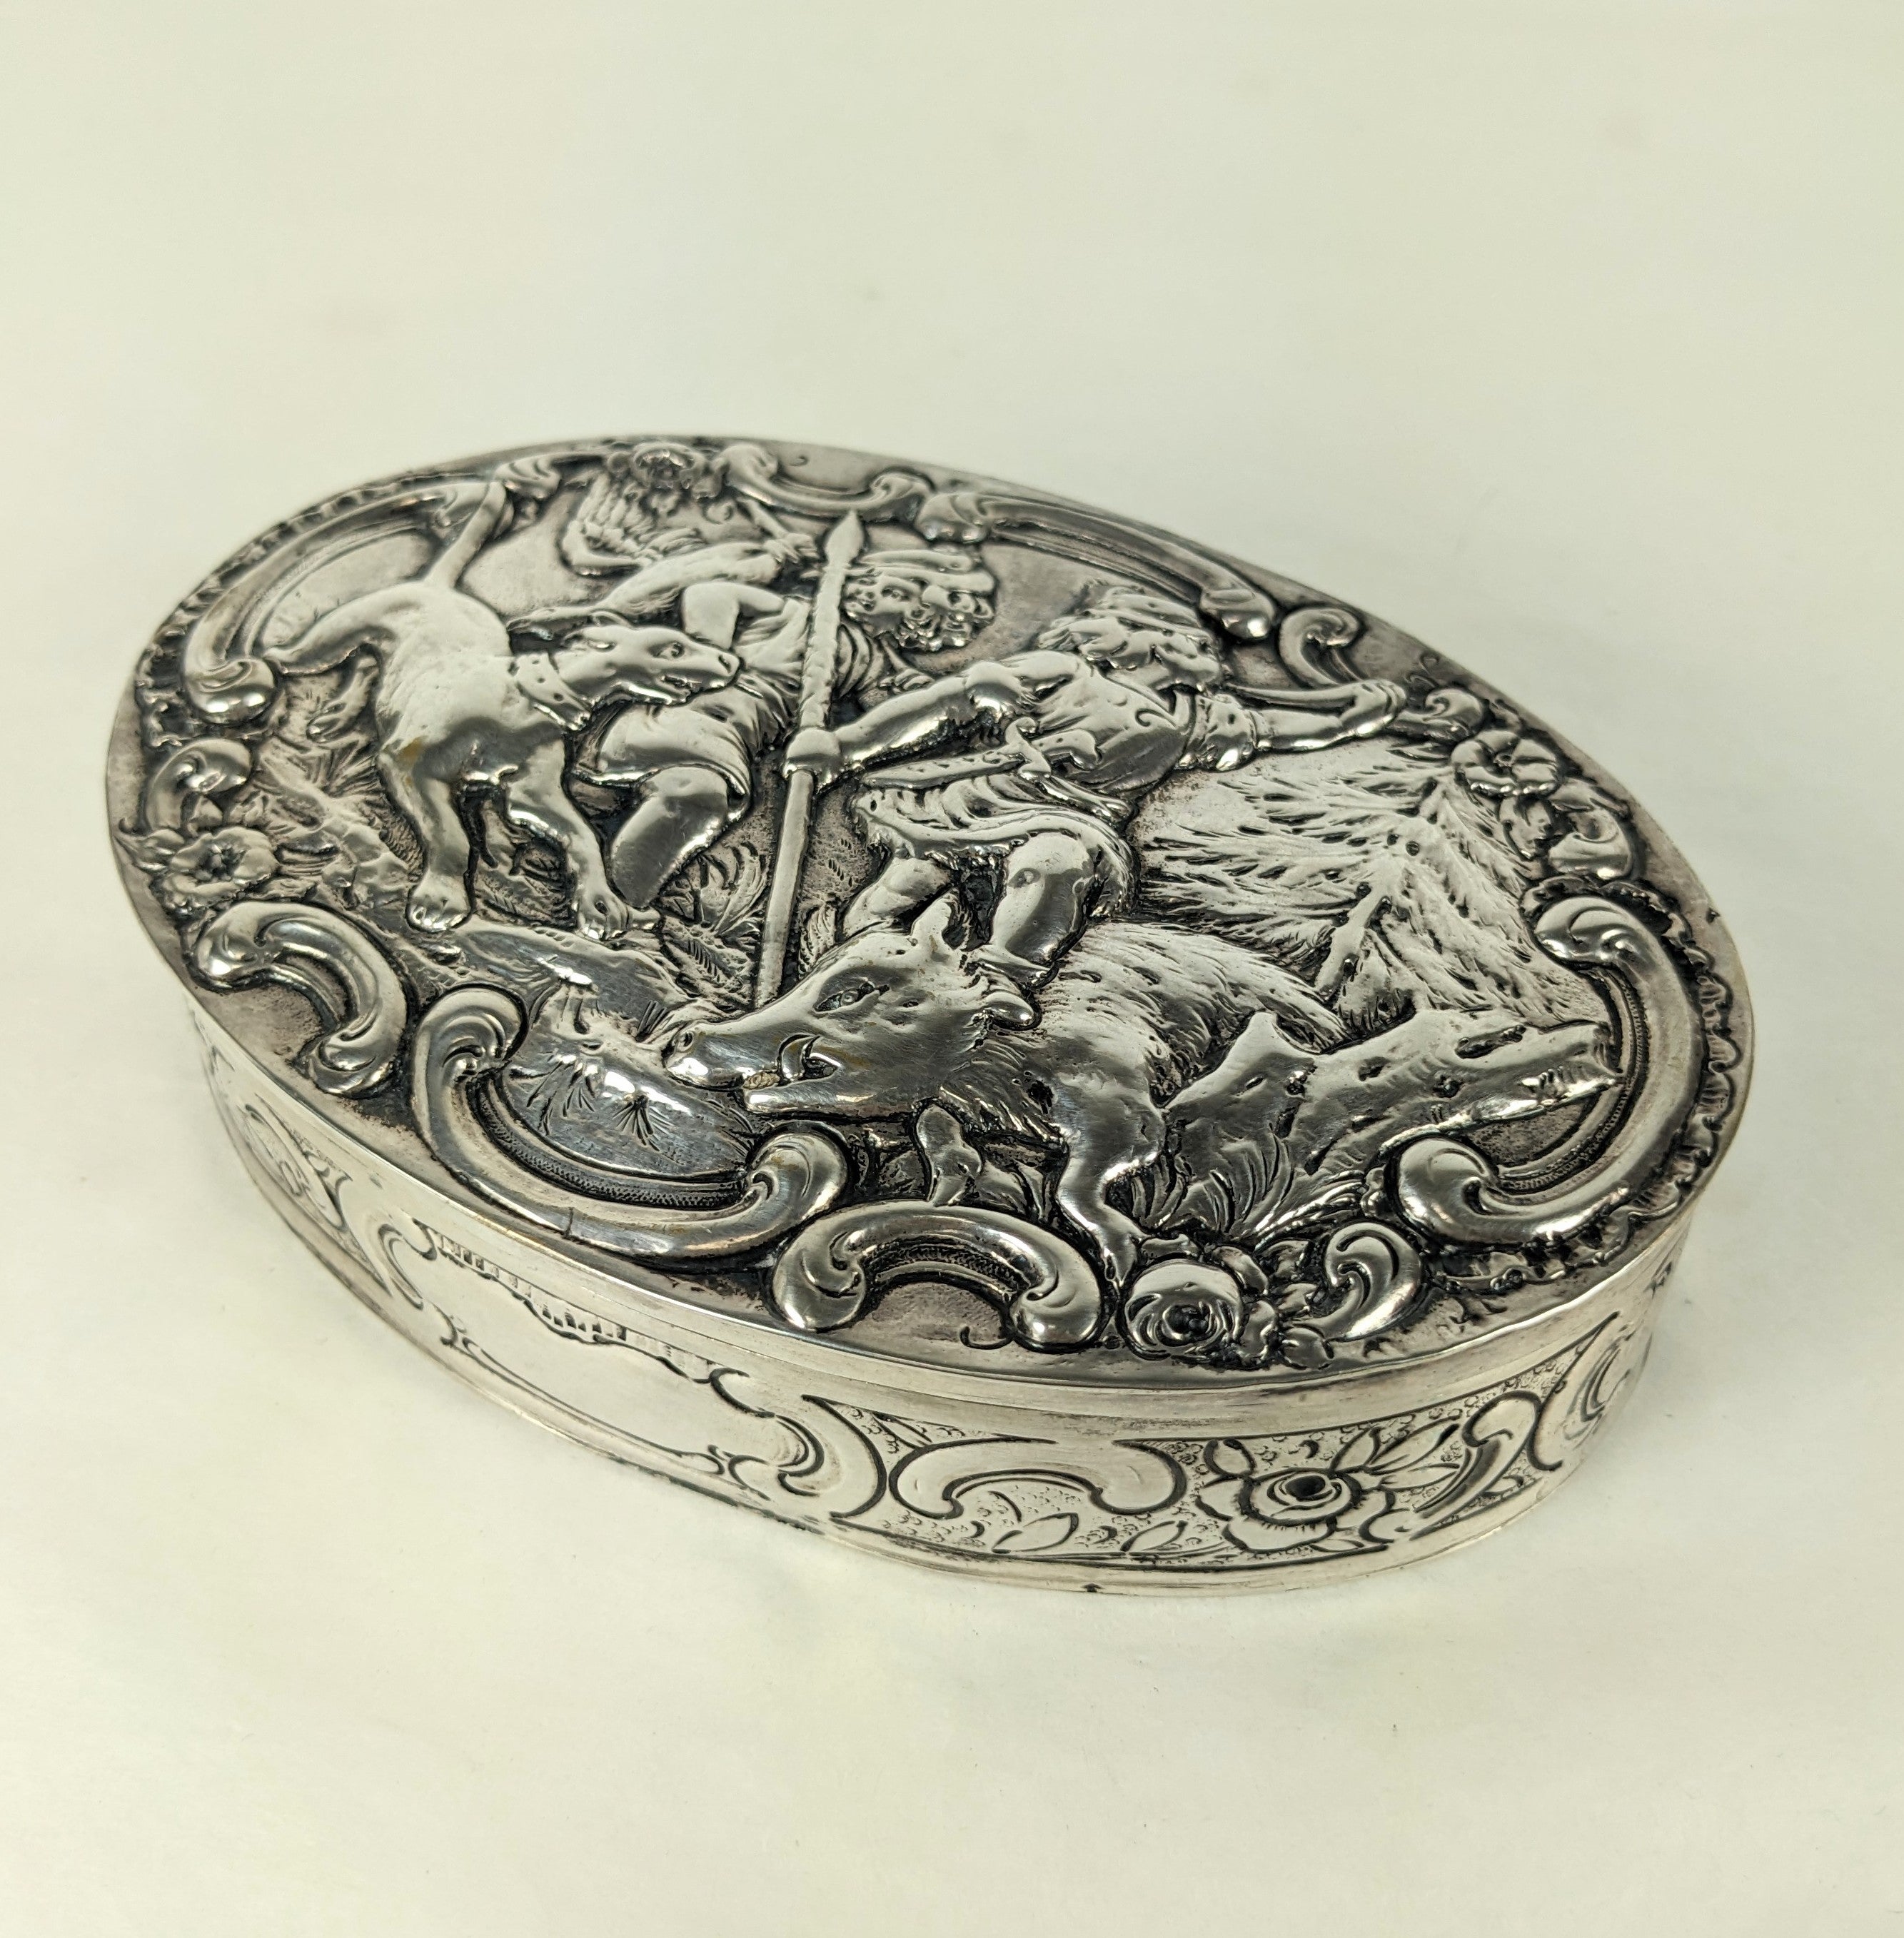 Elegant Continental Silver Hunt Scene Repousse Box. Hand repousee with hunters with boar, dog and boar. 1900's European hallmarks. Handmade. 5.75